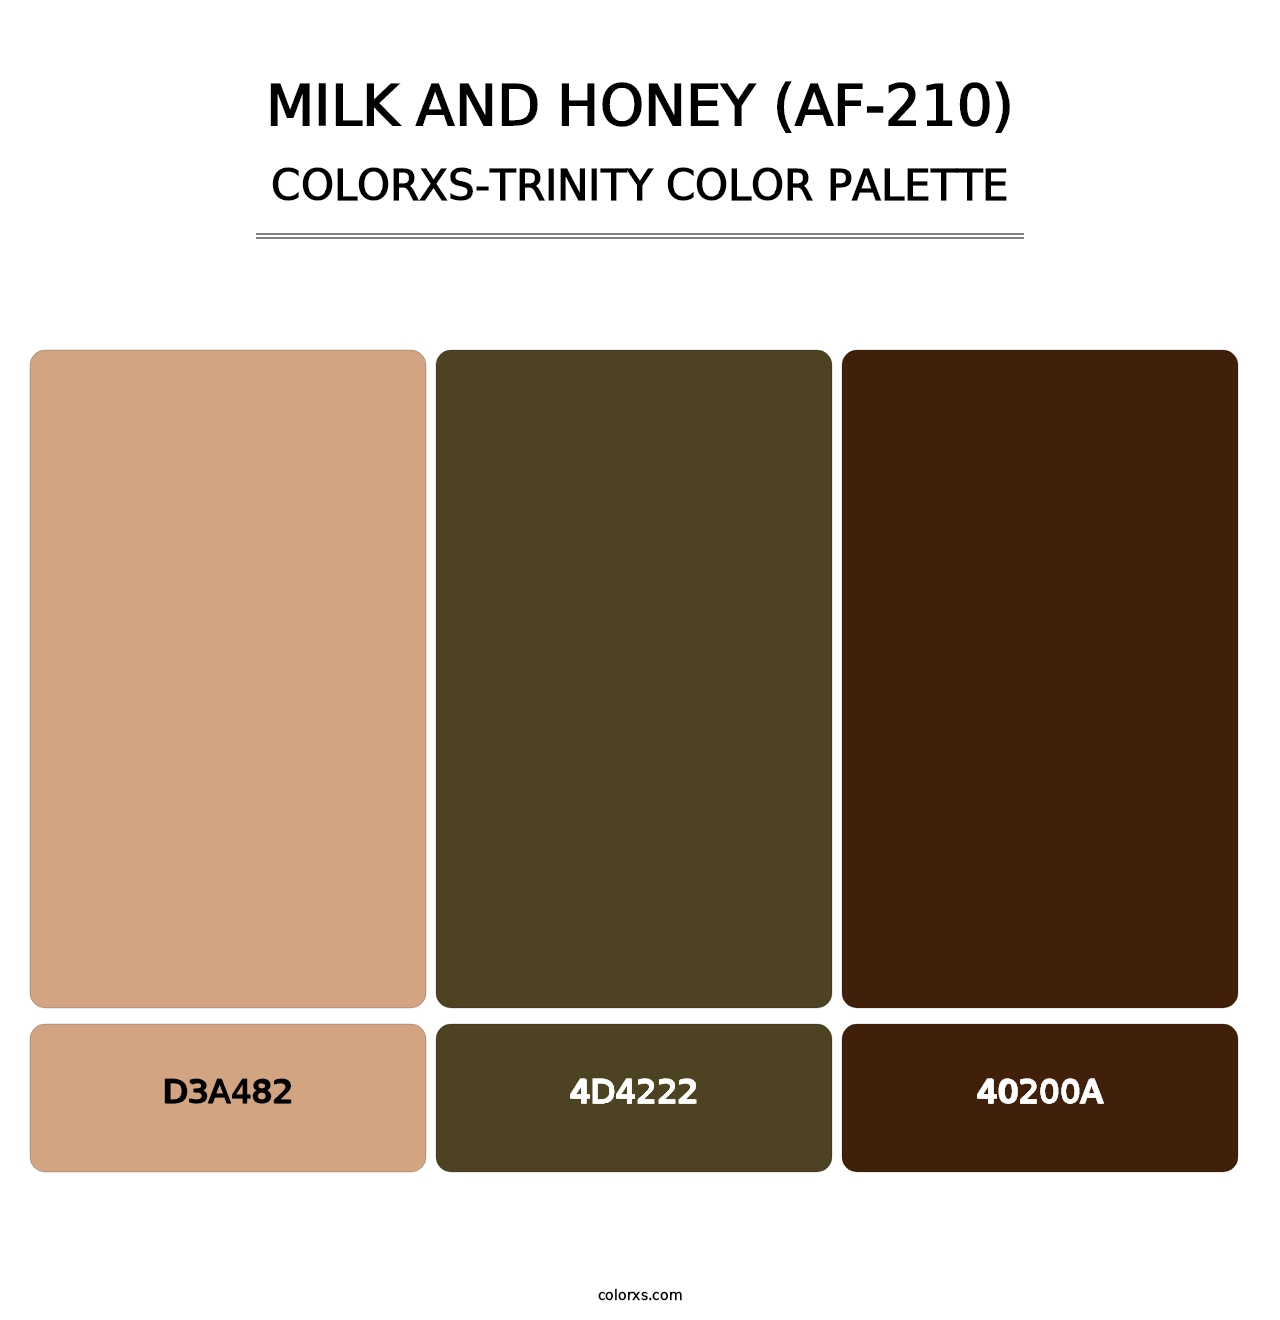 Milk and Honey (AF-210) - Colorxs Trinity Palette